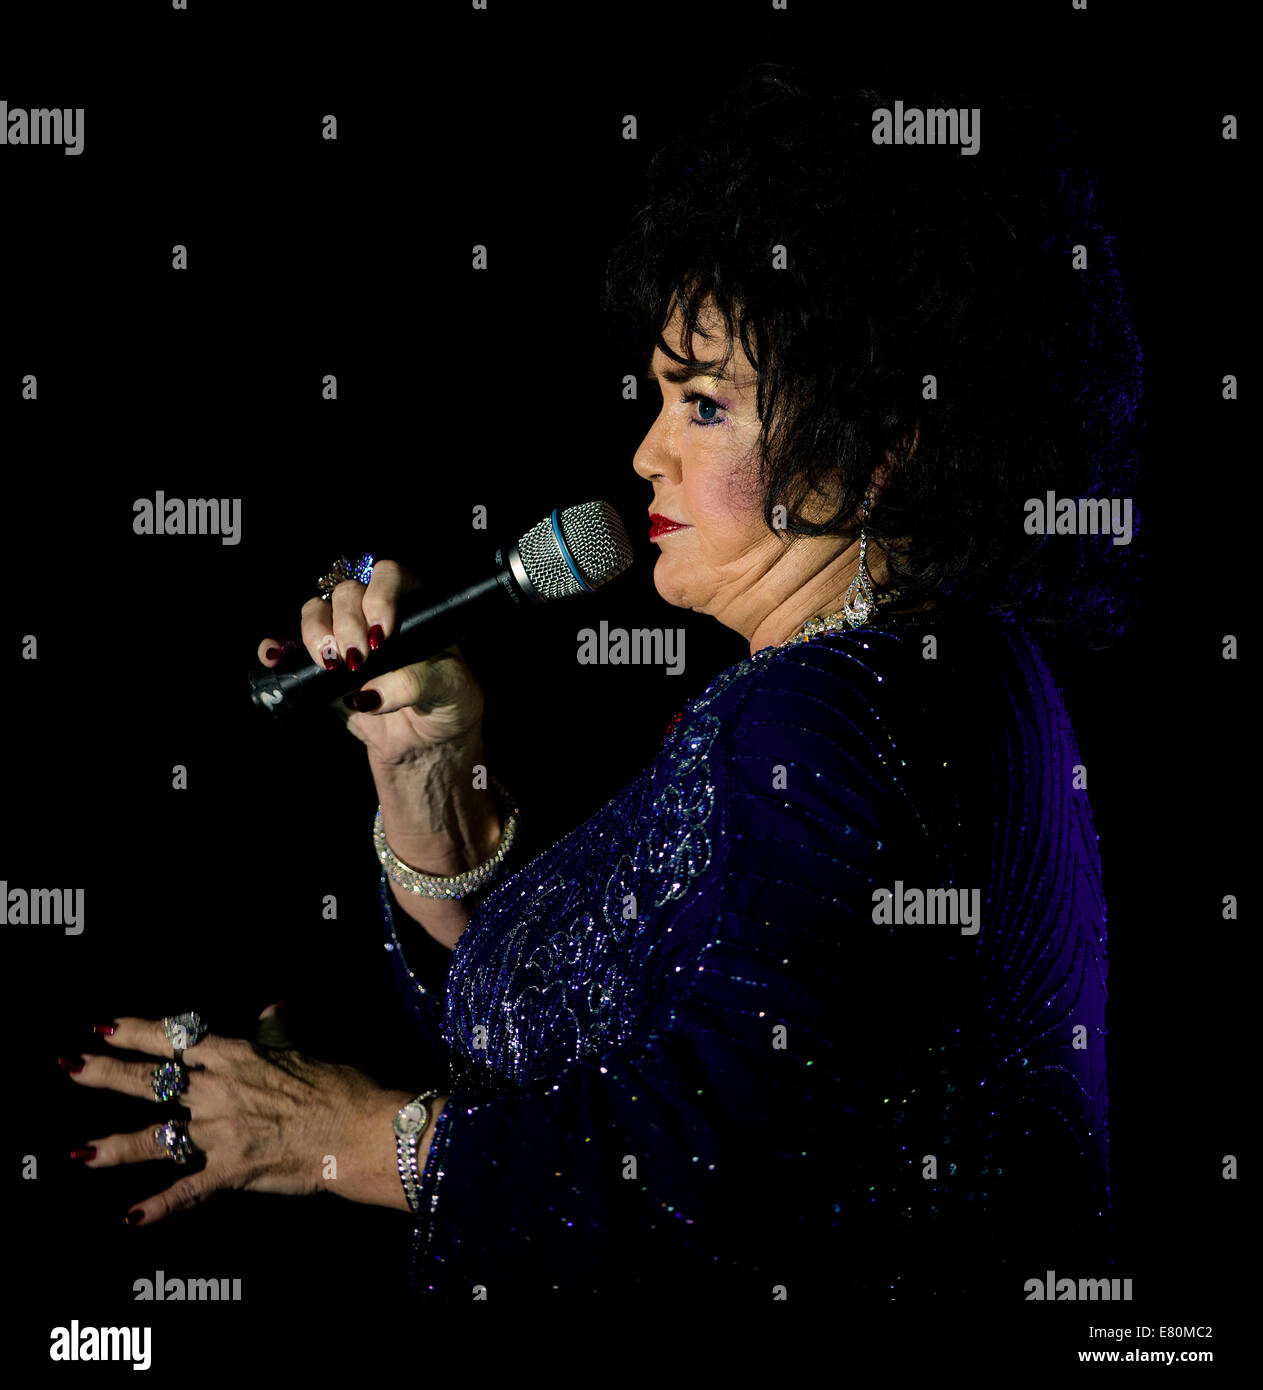 Orlando, Florida, USA. 27th Sep, 2014. LOUISE GALLAGHER performs as Dame Elizabeth Taylor during a showcase at the 12th Annual Sunburst Convention of Celebrity Impersonators and Tribute Artists. Dozens of celebrity impersonators and look-alikes gather here each year to perform in front of agents, talent buyers and producers to try to get work in this entertainment industry niche. Credit:  Brian Cahn/ZUMA Wire/Alamy Live News Stock Photo